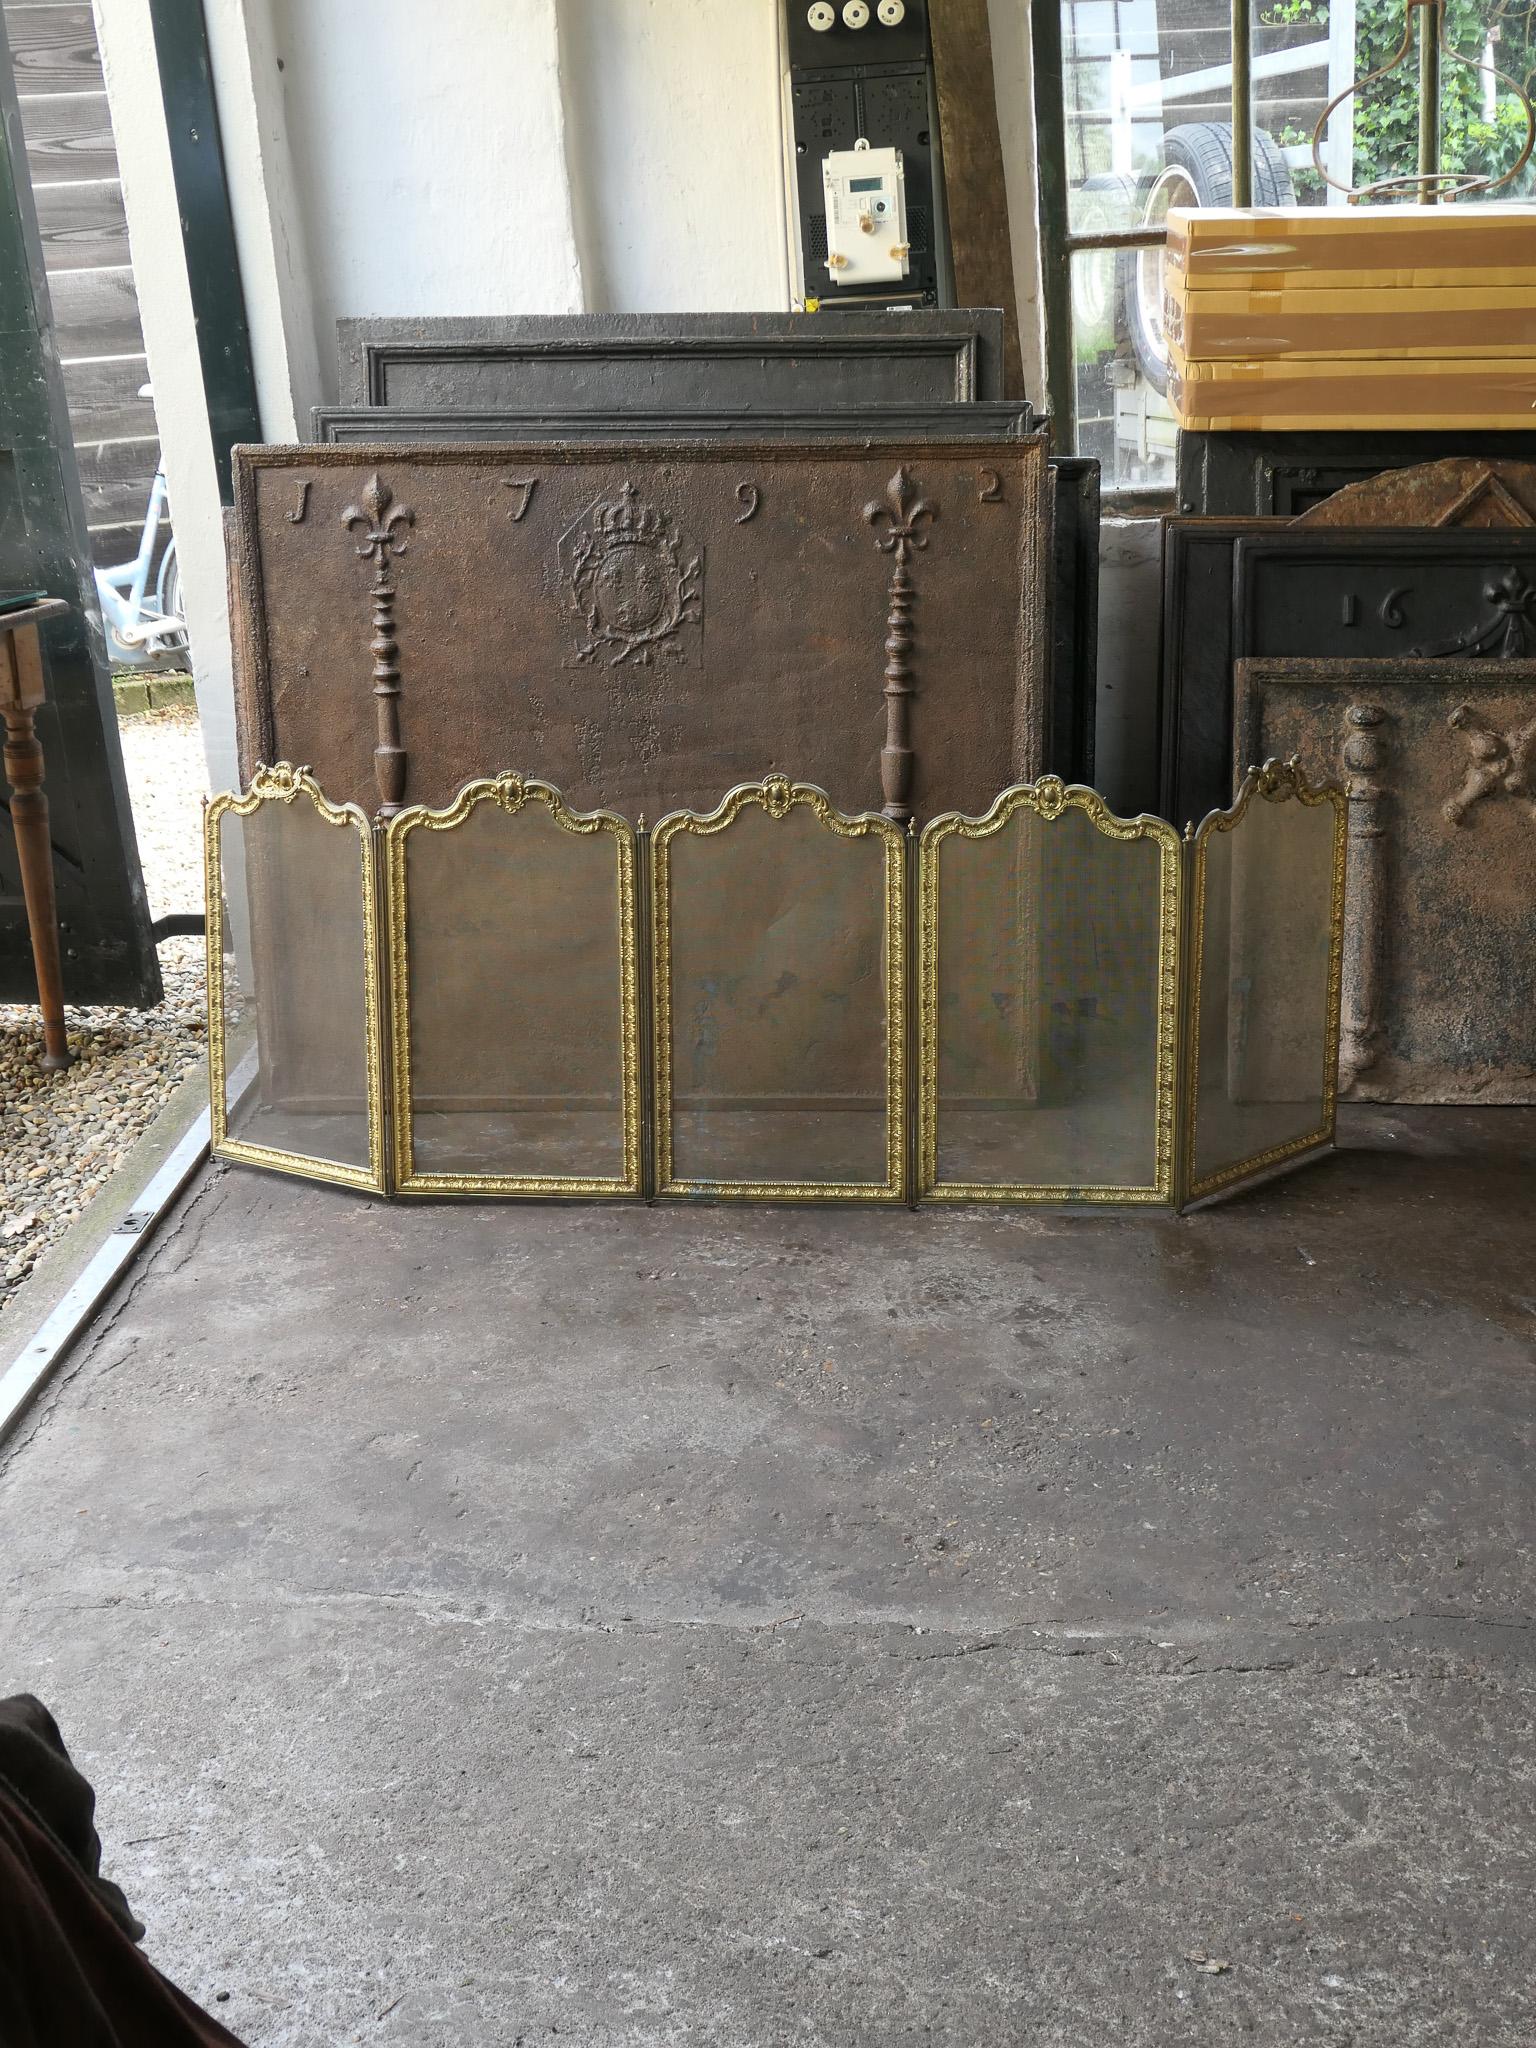 Beautiful 19th century French Napoleon III style five panel fireplace screen made by Bouhon Frères. The screen is made of brass, iron, and iron mesh. 

Bouhon Frères were prominent French producers of fireplace tools in the 19th century. The firm